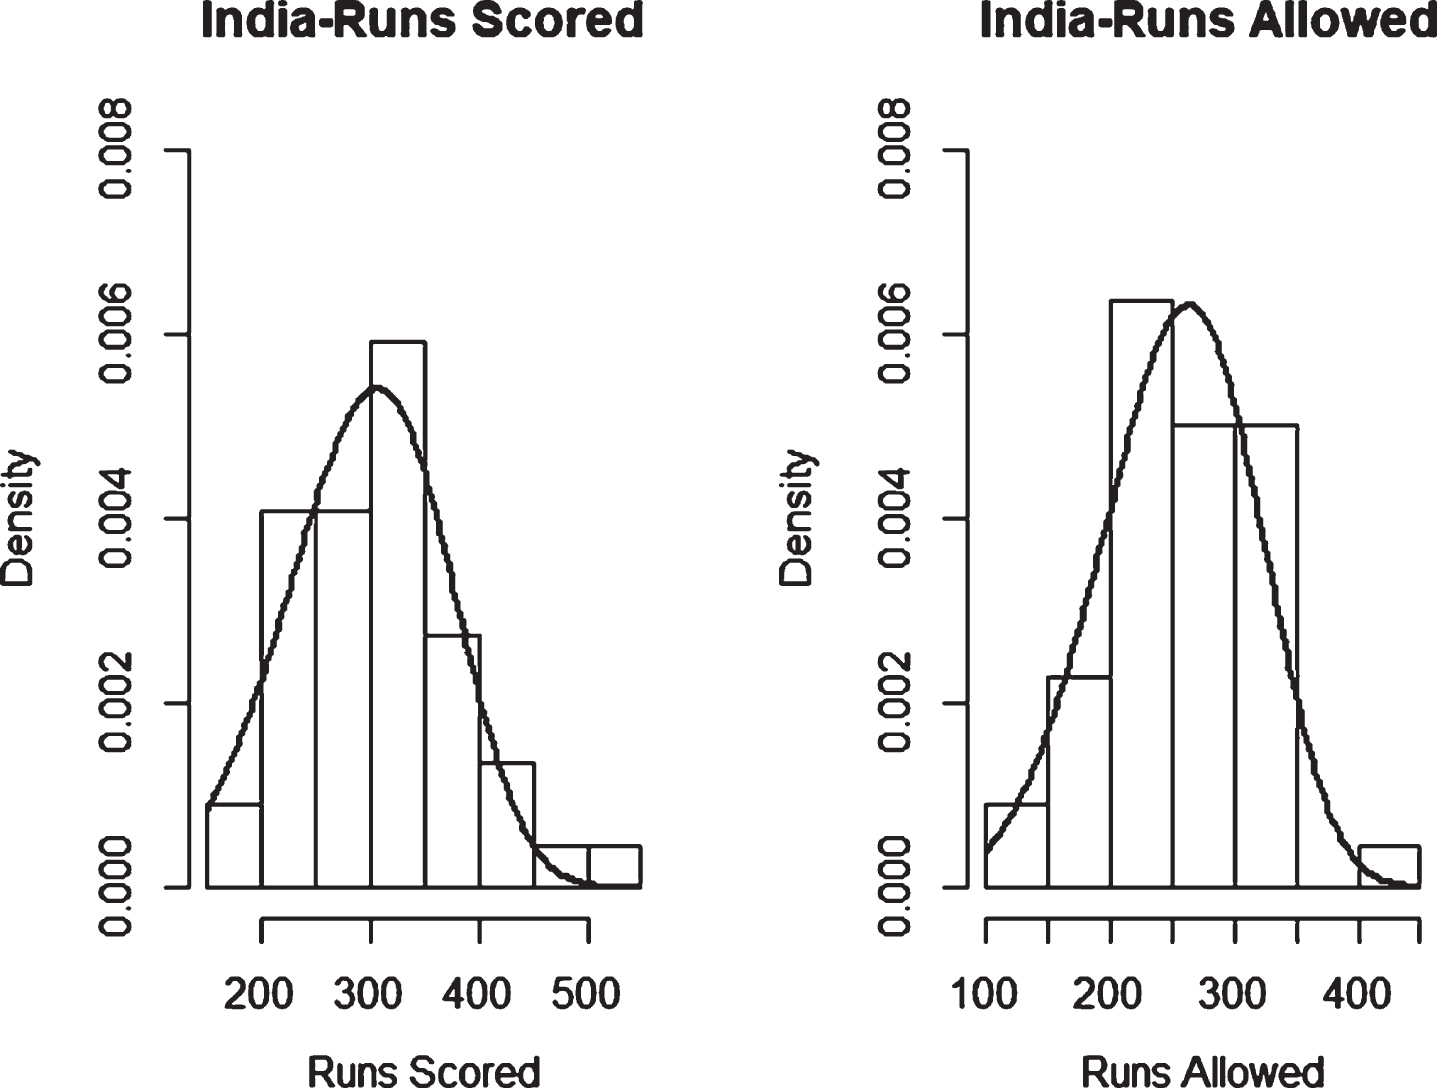 Weibull Distribution Fit for Runs Scored and Runs Allowed for India using Least Squares Method (ODI).